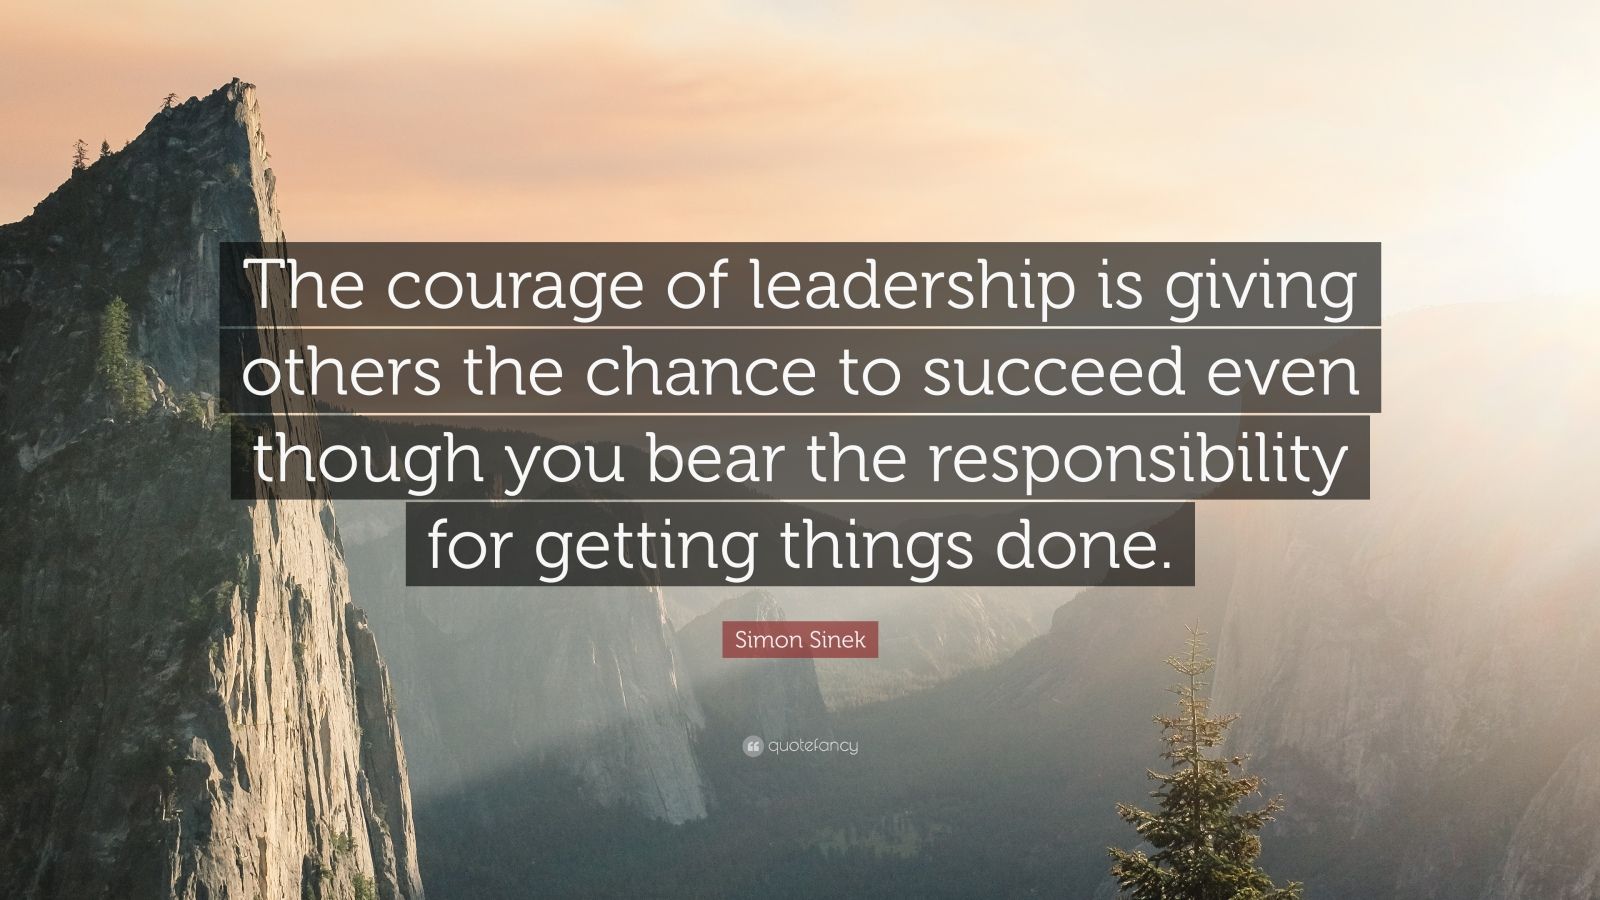 Simon Sinek Quote: “The courage of leadership is giving others the